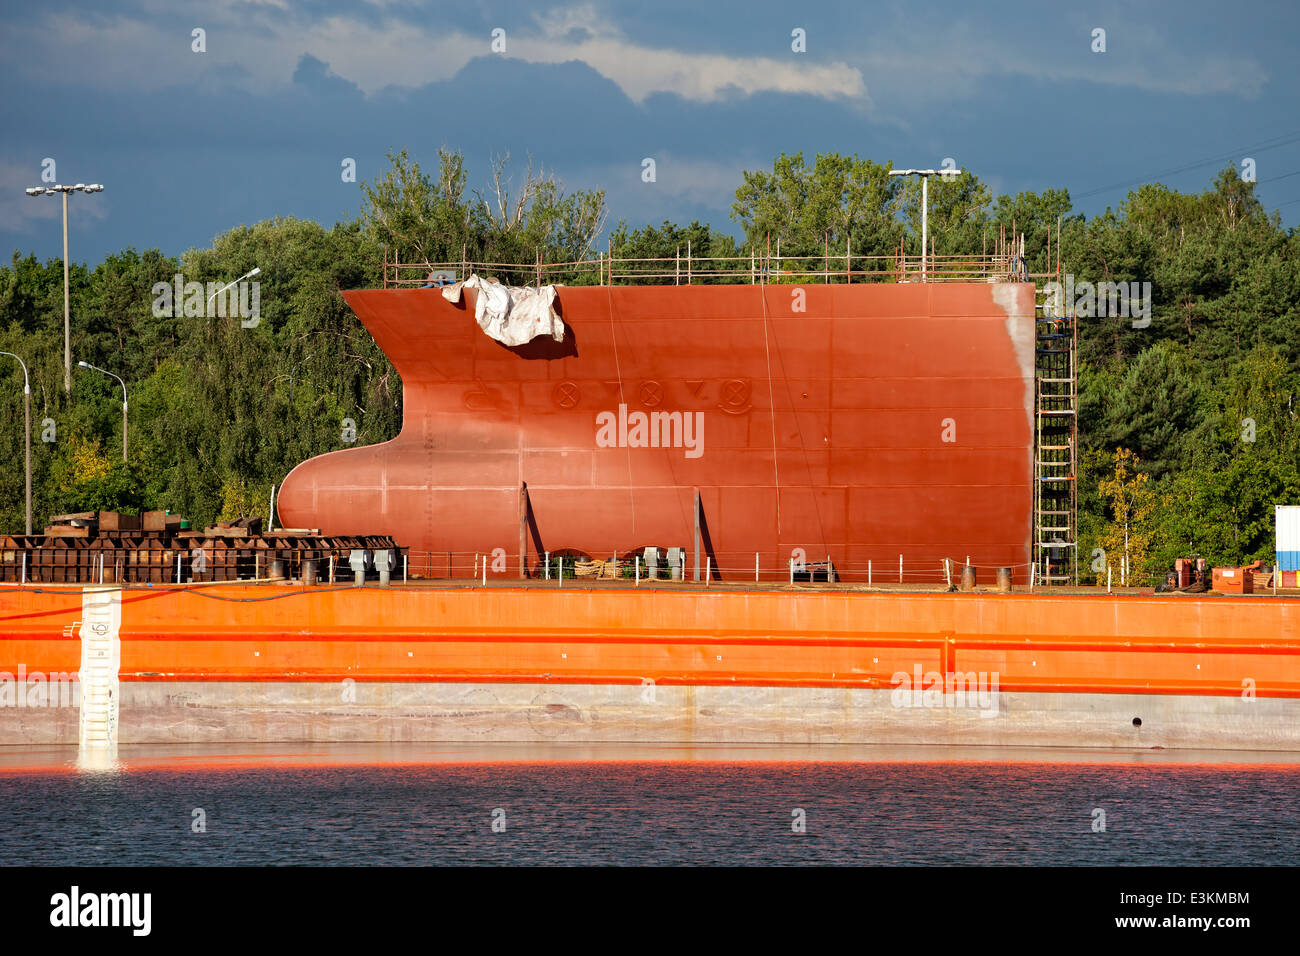 Part of large ship under construction. Stock Photo